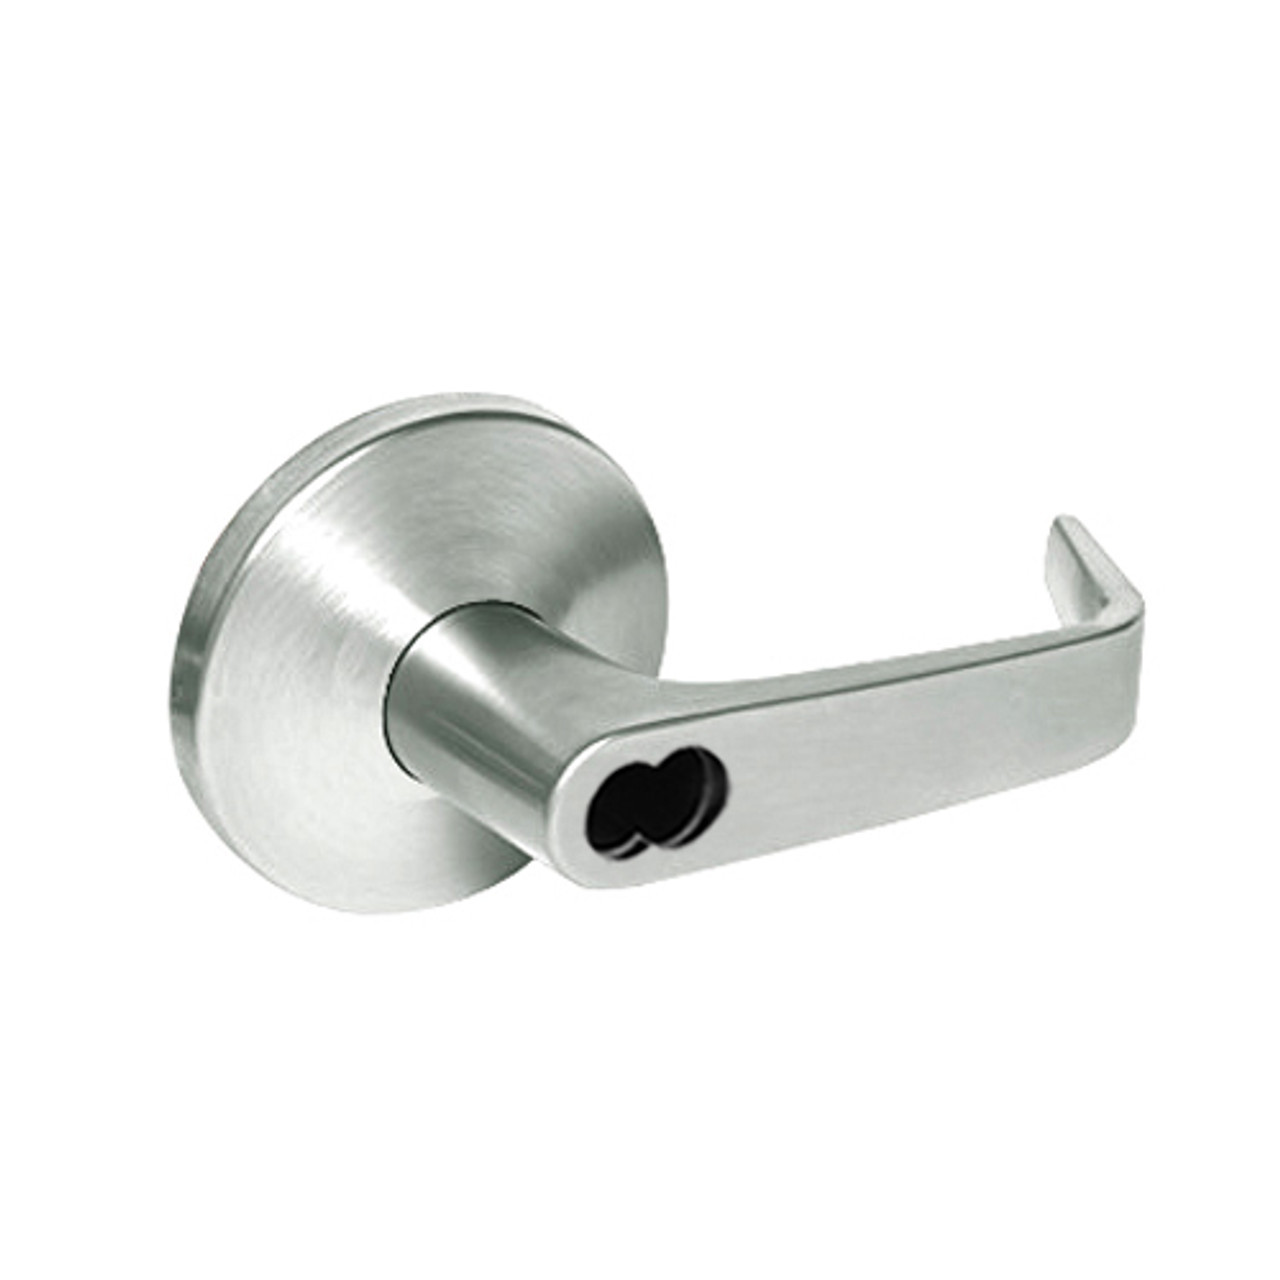 9K37DR15LS3619LM Best 9K Series Special Function Cylindrical Lever Locks with Contour Angle with Return Lever Design Accept 7 Pin Best Core in Satin Nickel